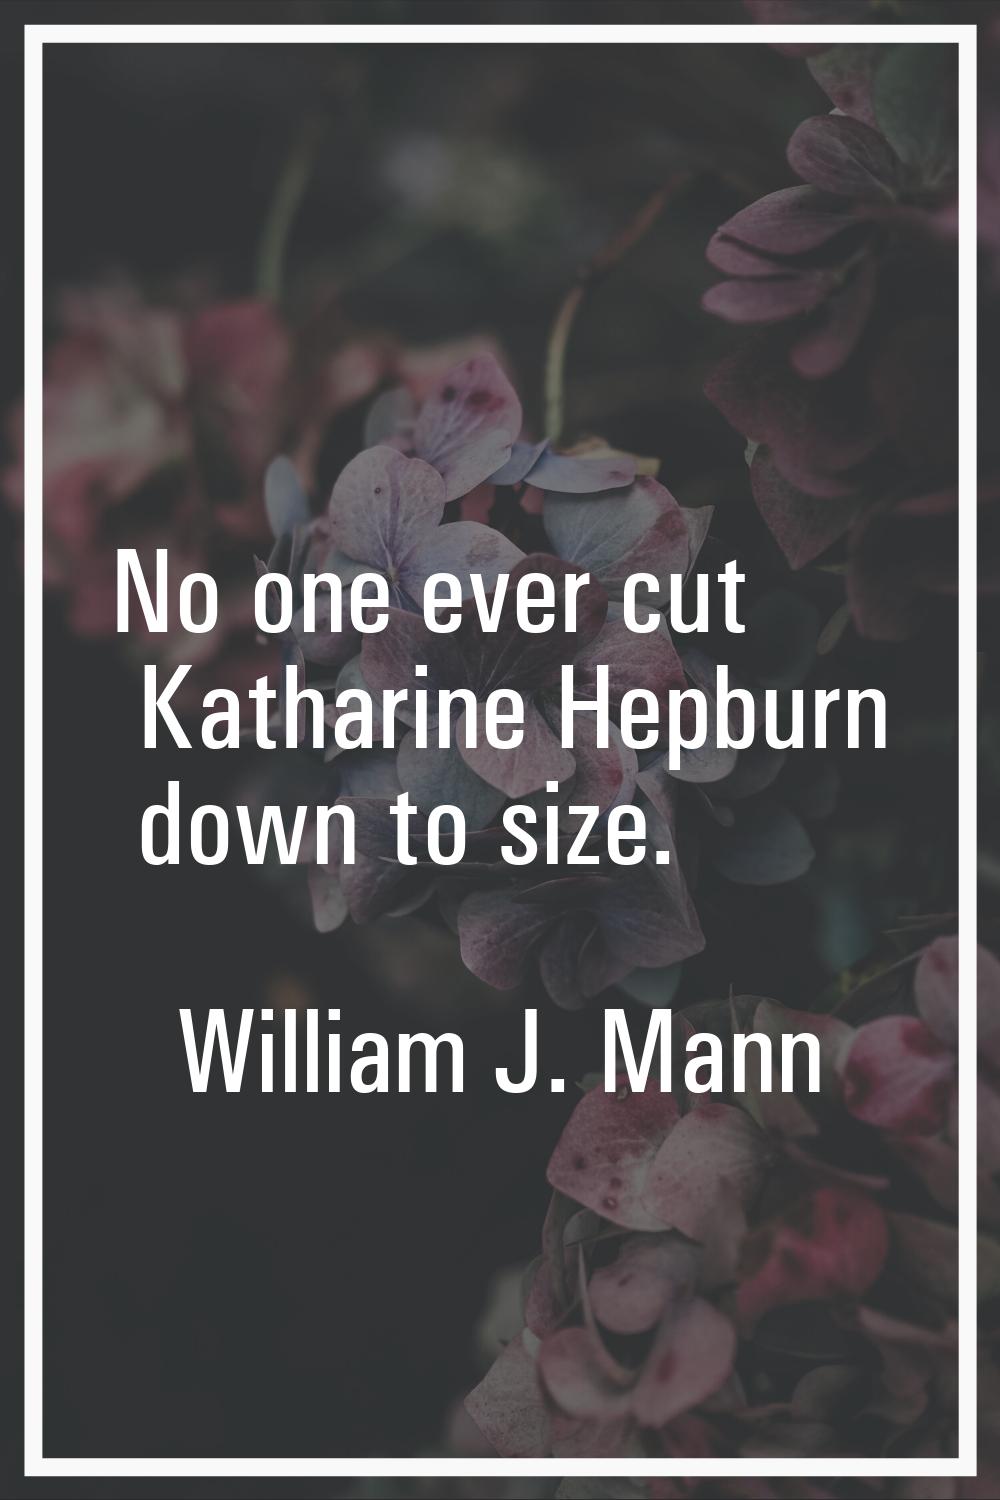 No one ever cut Katharine Hepburn down to size.